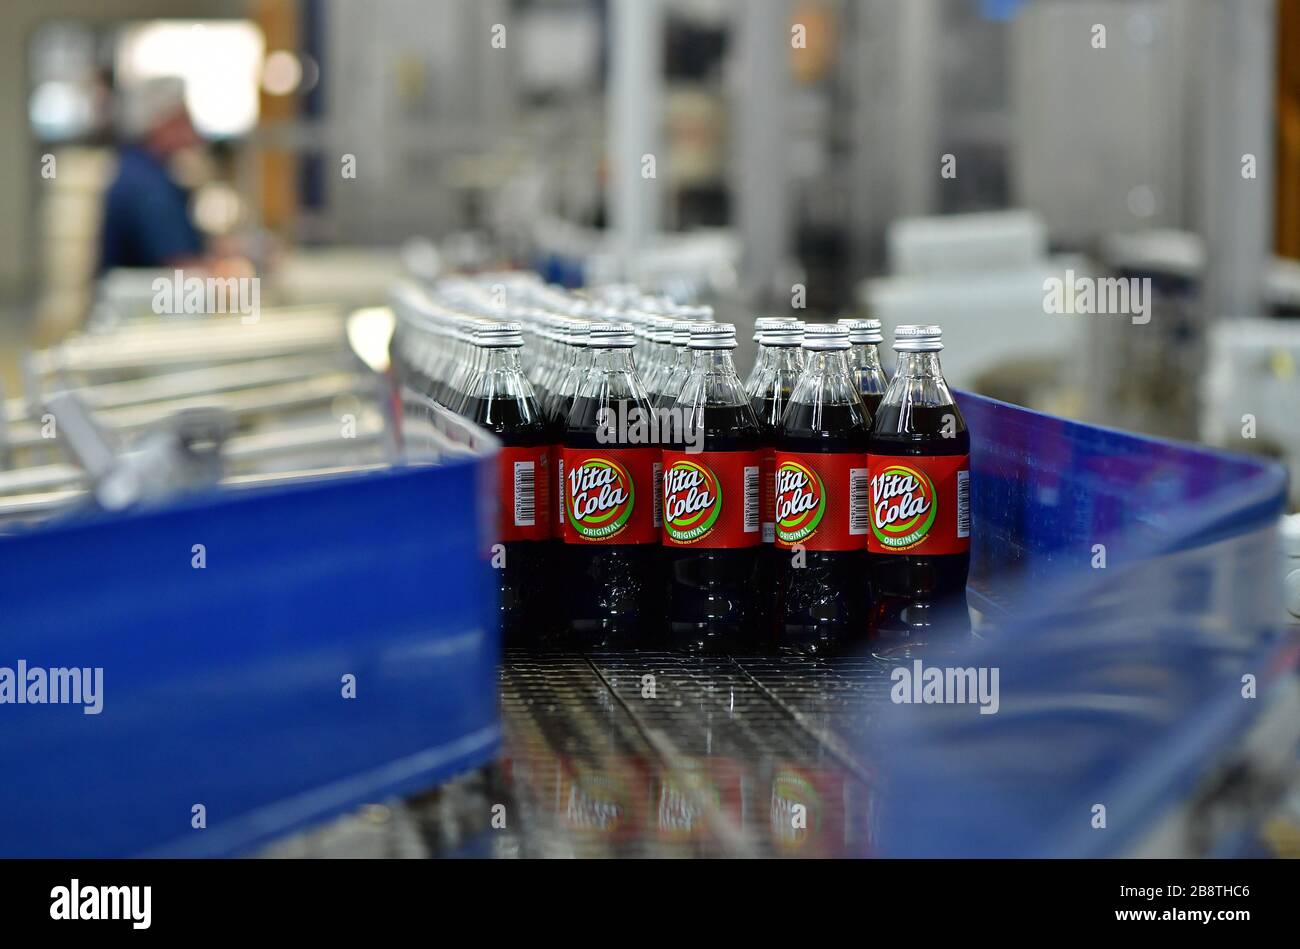 Lichtenau, Germany. 19th Mar, 2020. An employee monitors the filling of Vita Cola in 0.33 litre returnable glass bottles. Vita Cola is owned by Thüringer Waldquell GmbH in Schmalkalden, which is part of the Hessian Hassia Group. Credit: Martin Schutt/dpa-Zentralbild/dpa/Alamy Live News Stock Photo